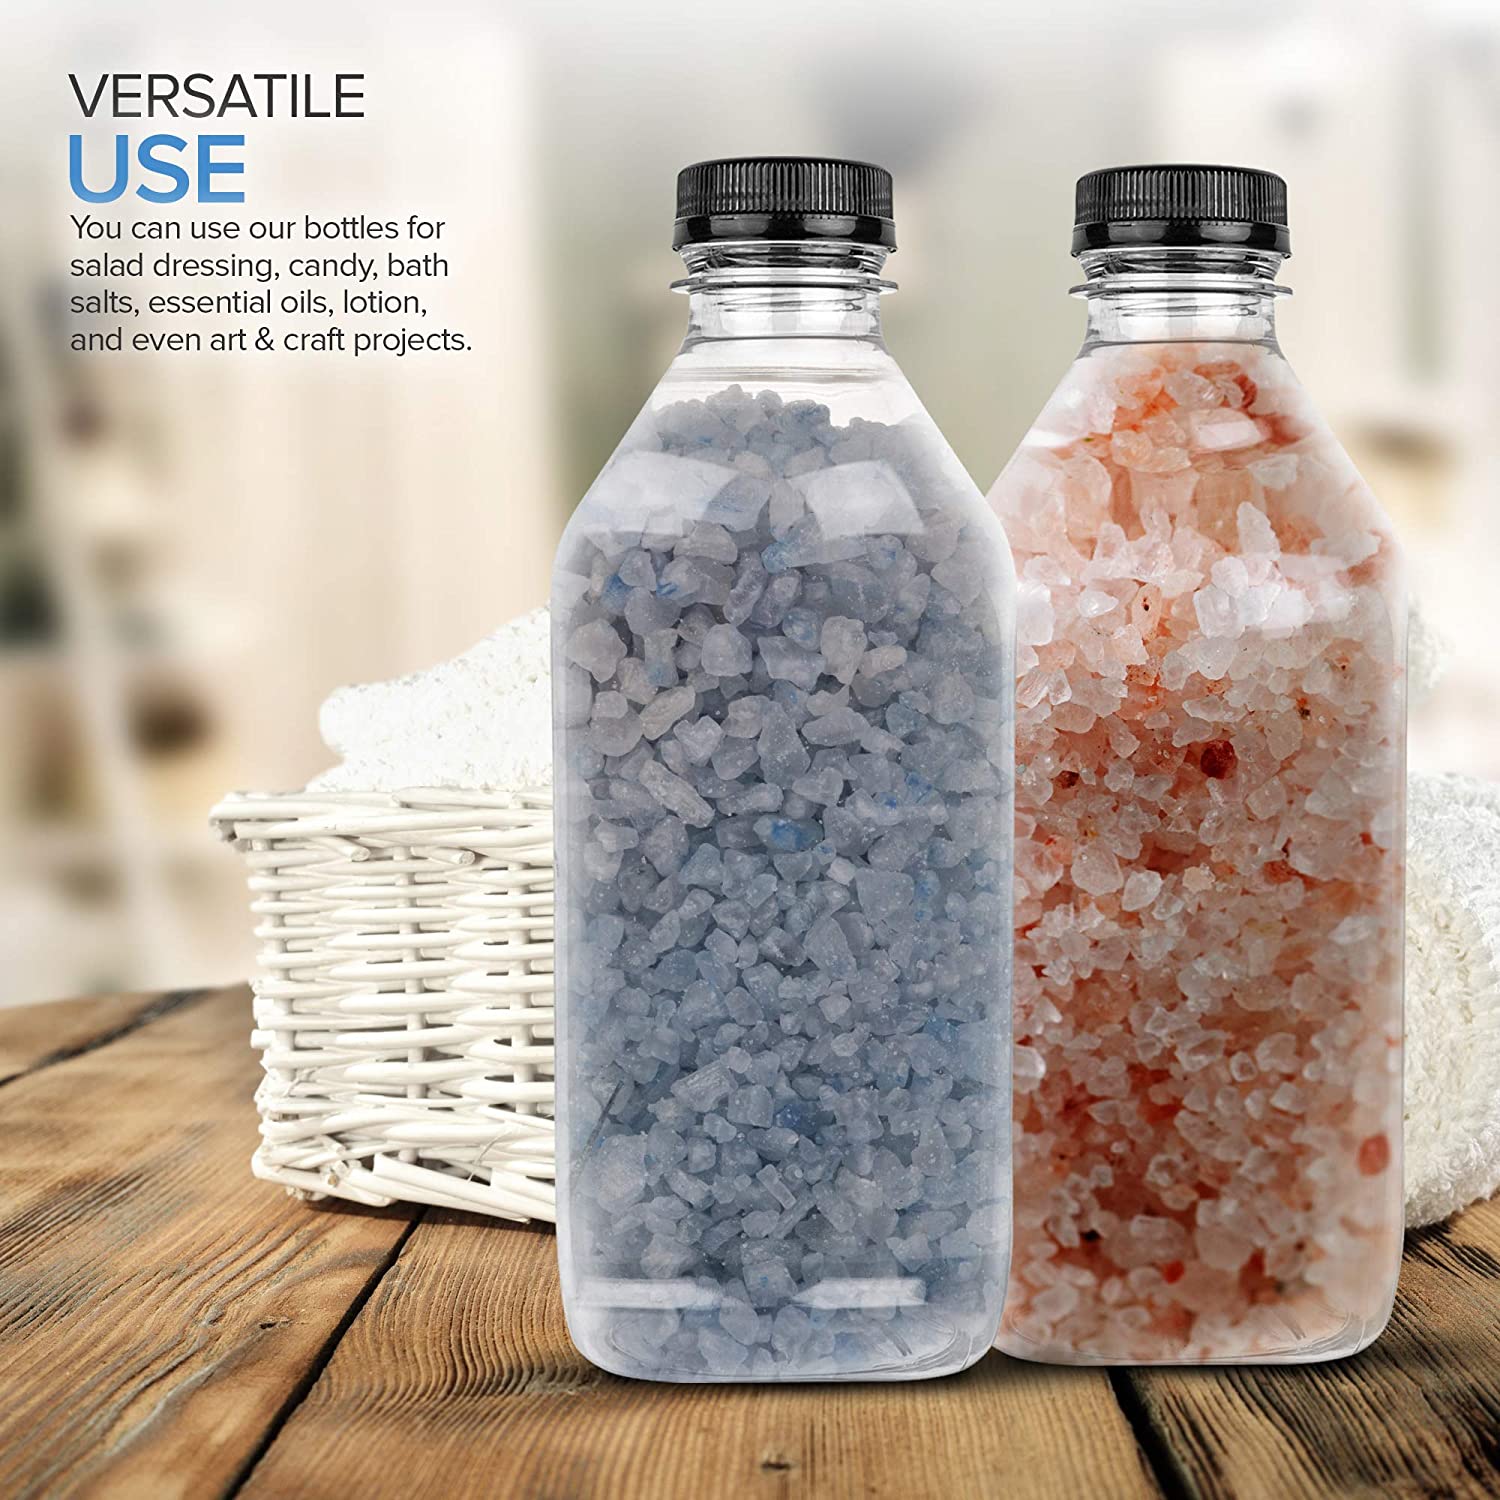 Glass Juice Bottles With Lids - 12 Pack - Reusable Glass Water Bottles With  Caps